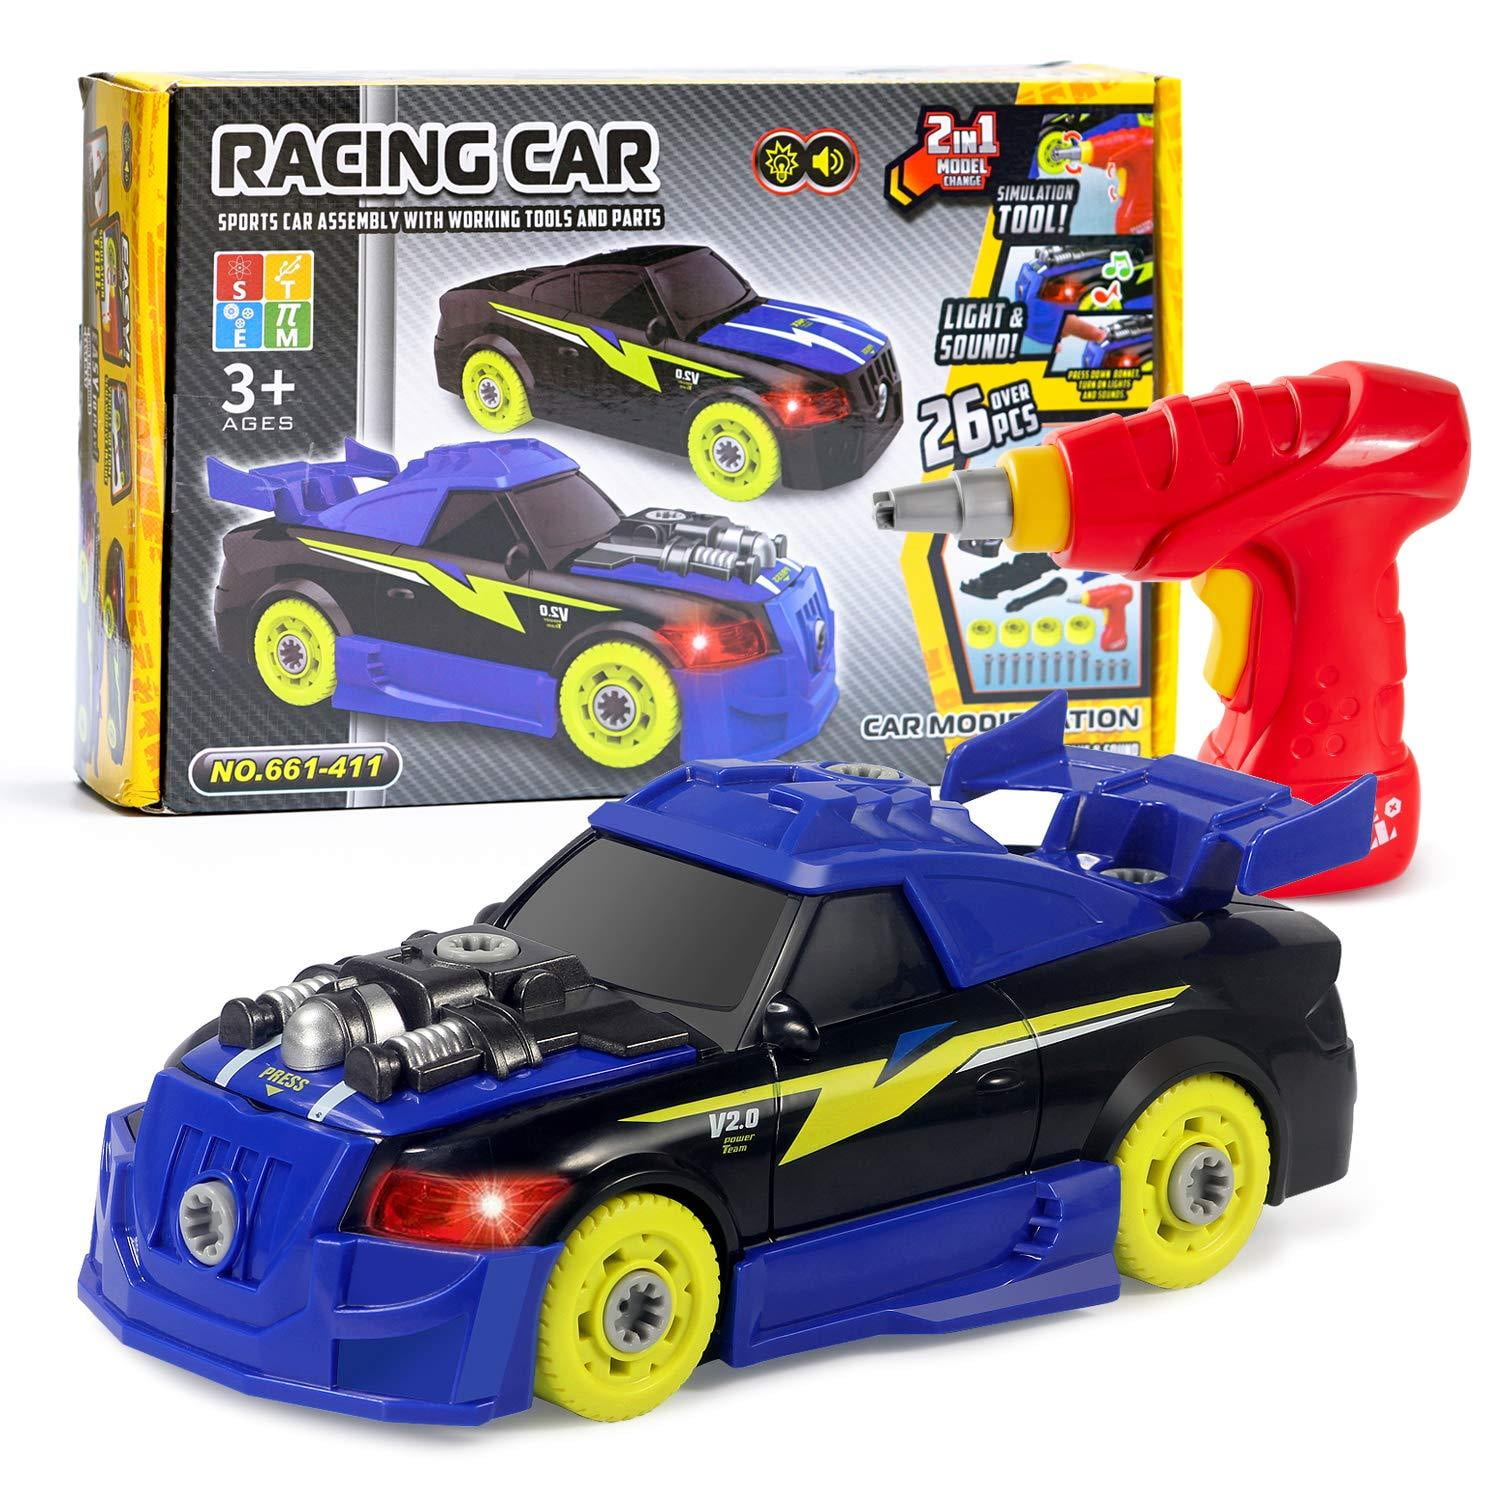 Childs Car Collection Toy Vehicle for Ages 3+ Boys and Girls Build Your Own Racing Car Creative STEM Car Toy Playset Kimiangel 2021 Take Apart Racing Car Design DIY Pull Back Car Set for Kids